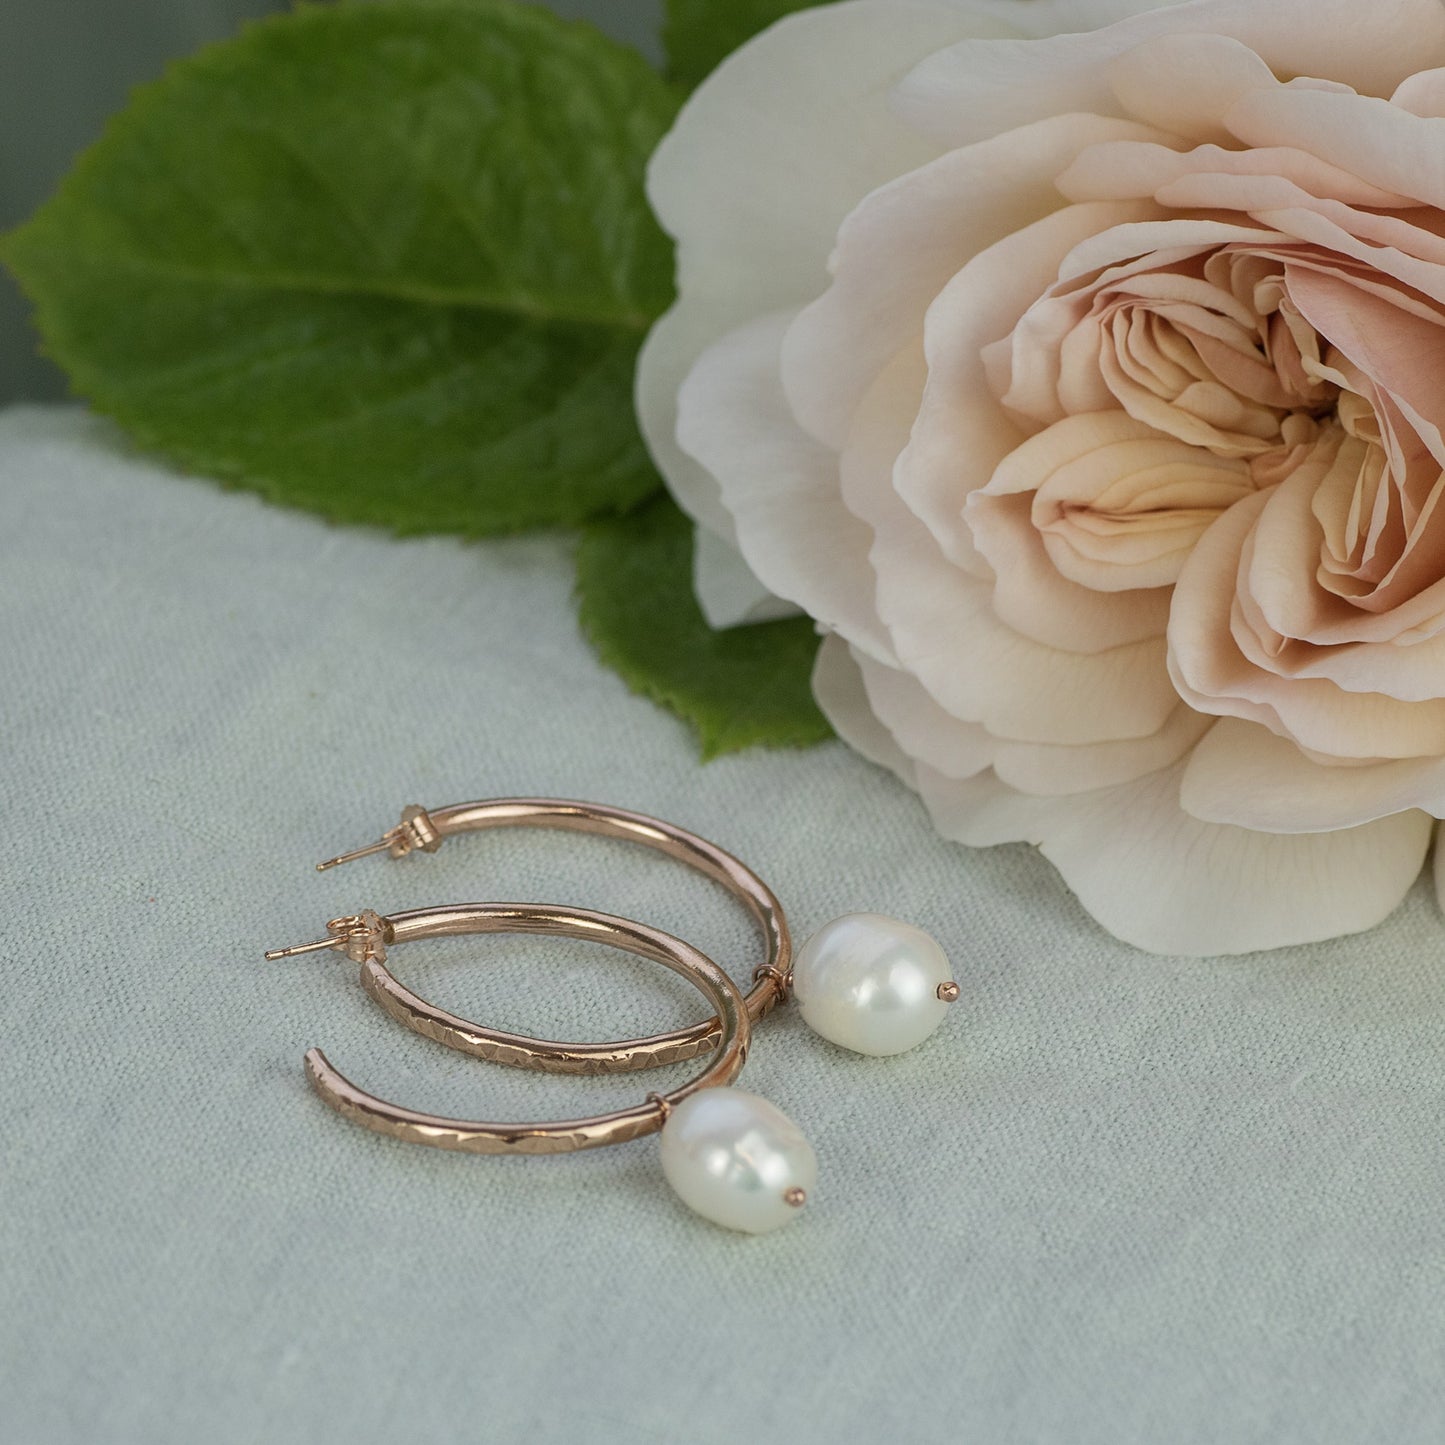 Rose Gold Hoops with Pearls - 3cm